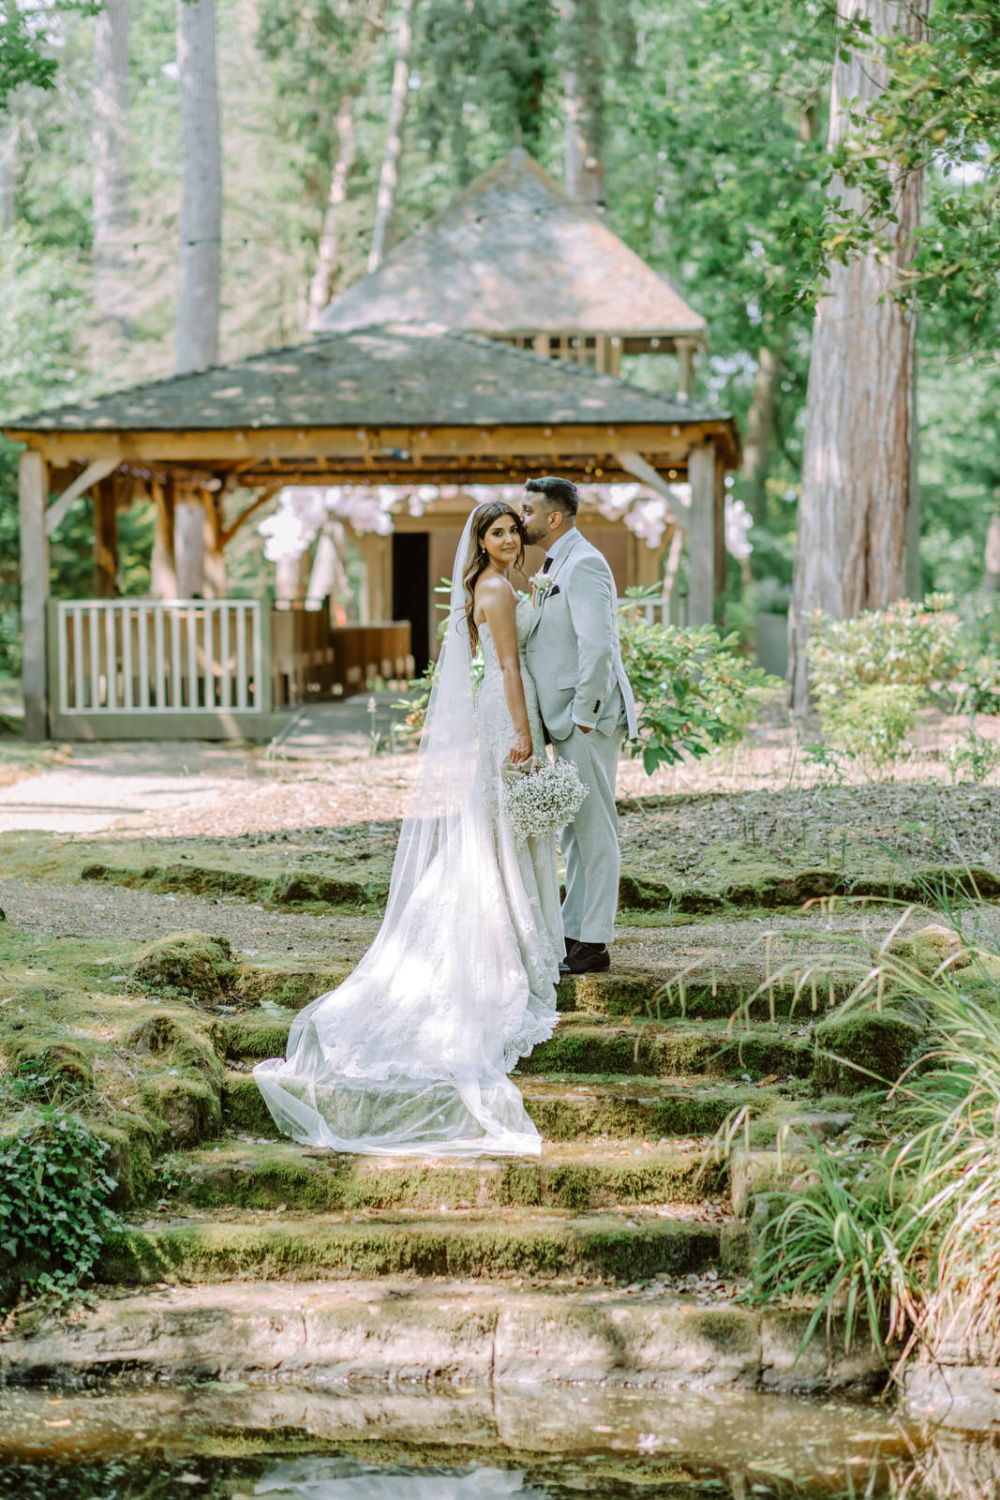 A bride and groom standing on steps near a pond at Hogarths Hotel Solihull on The Island surrounded by wooden grounds.